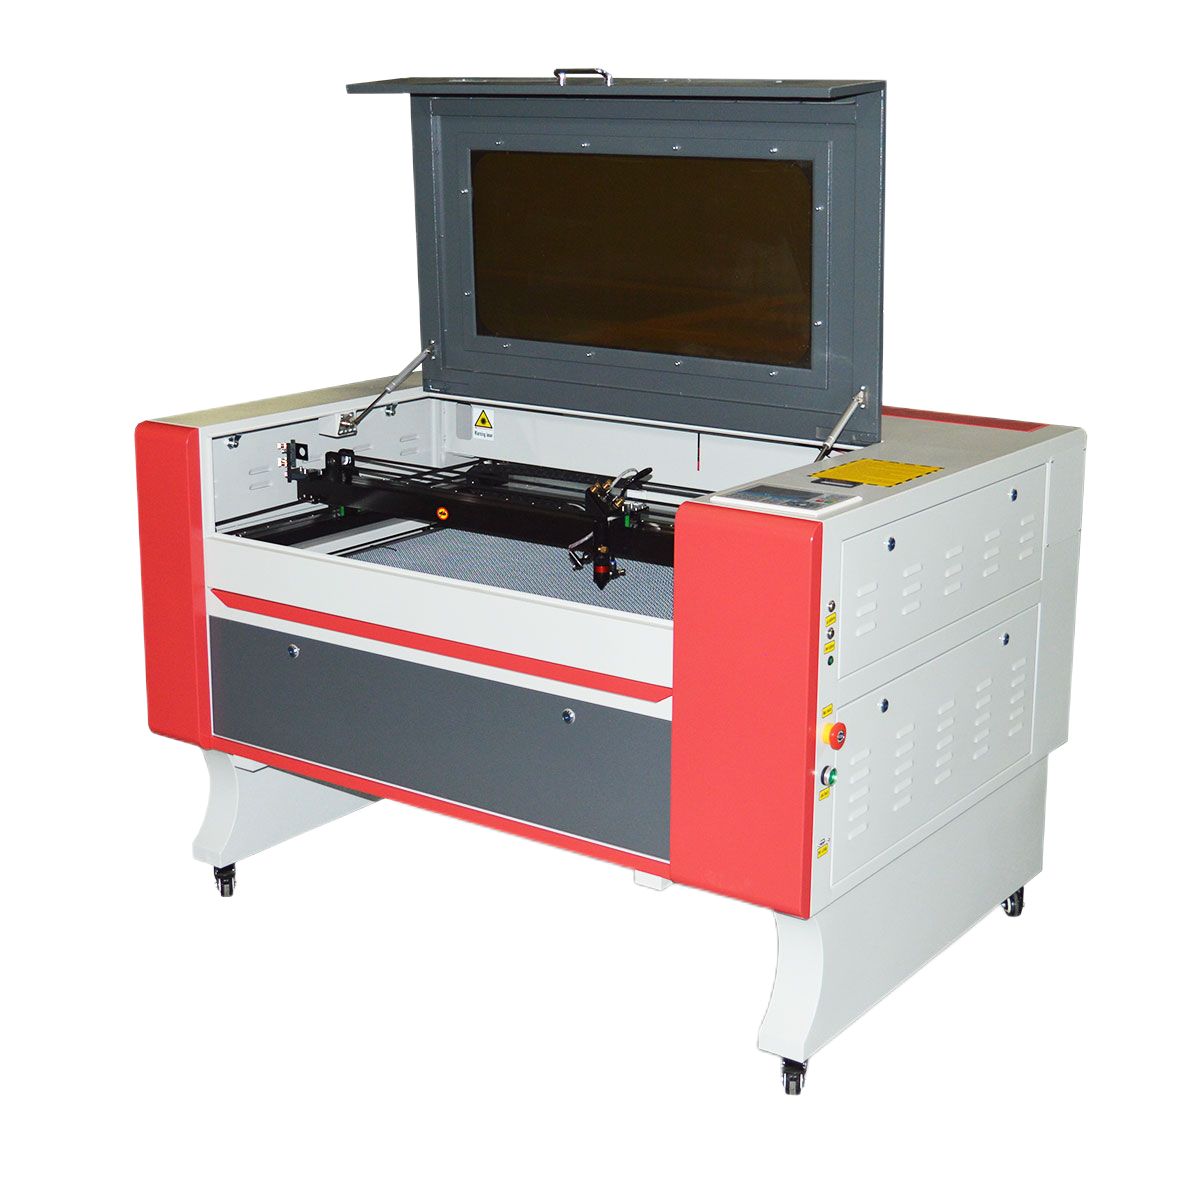 Mecco's New Laser Marking Solution for Heat Sensitive Materials |               Modern Machine Shop